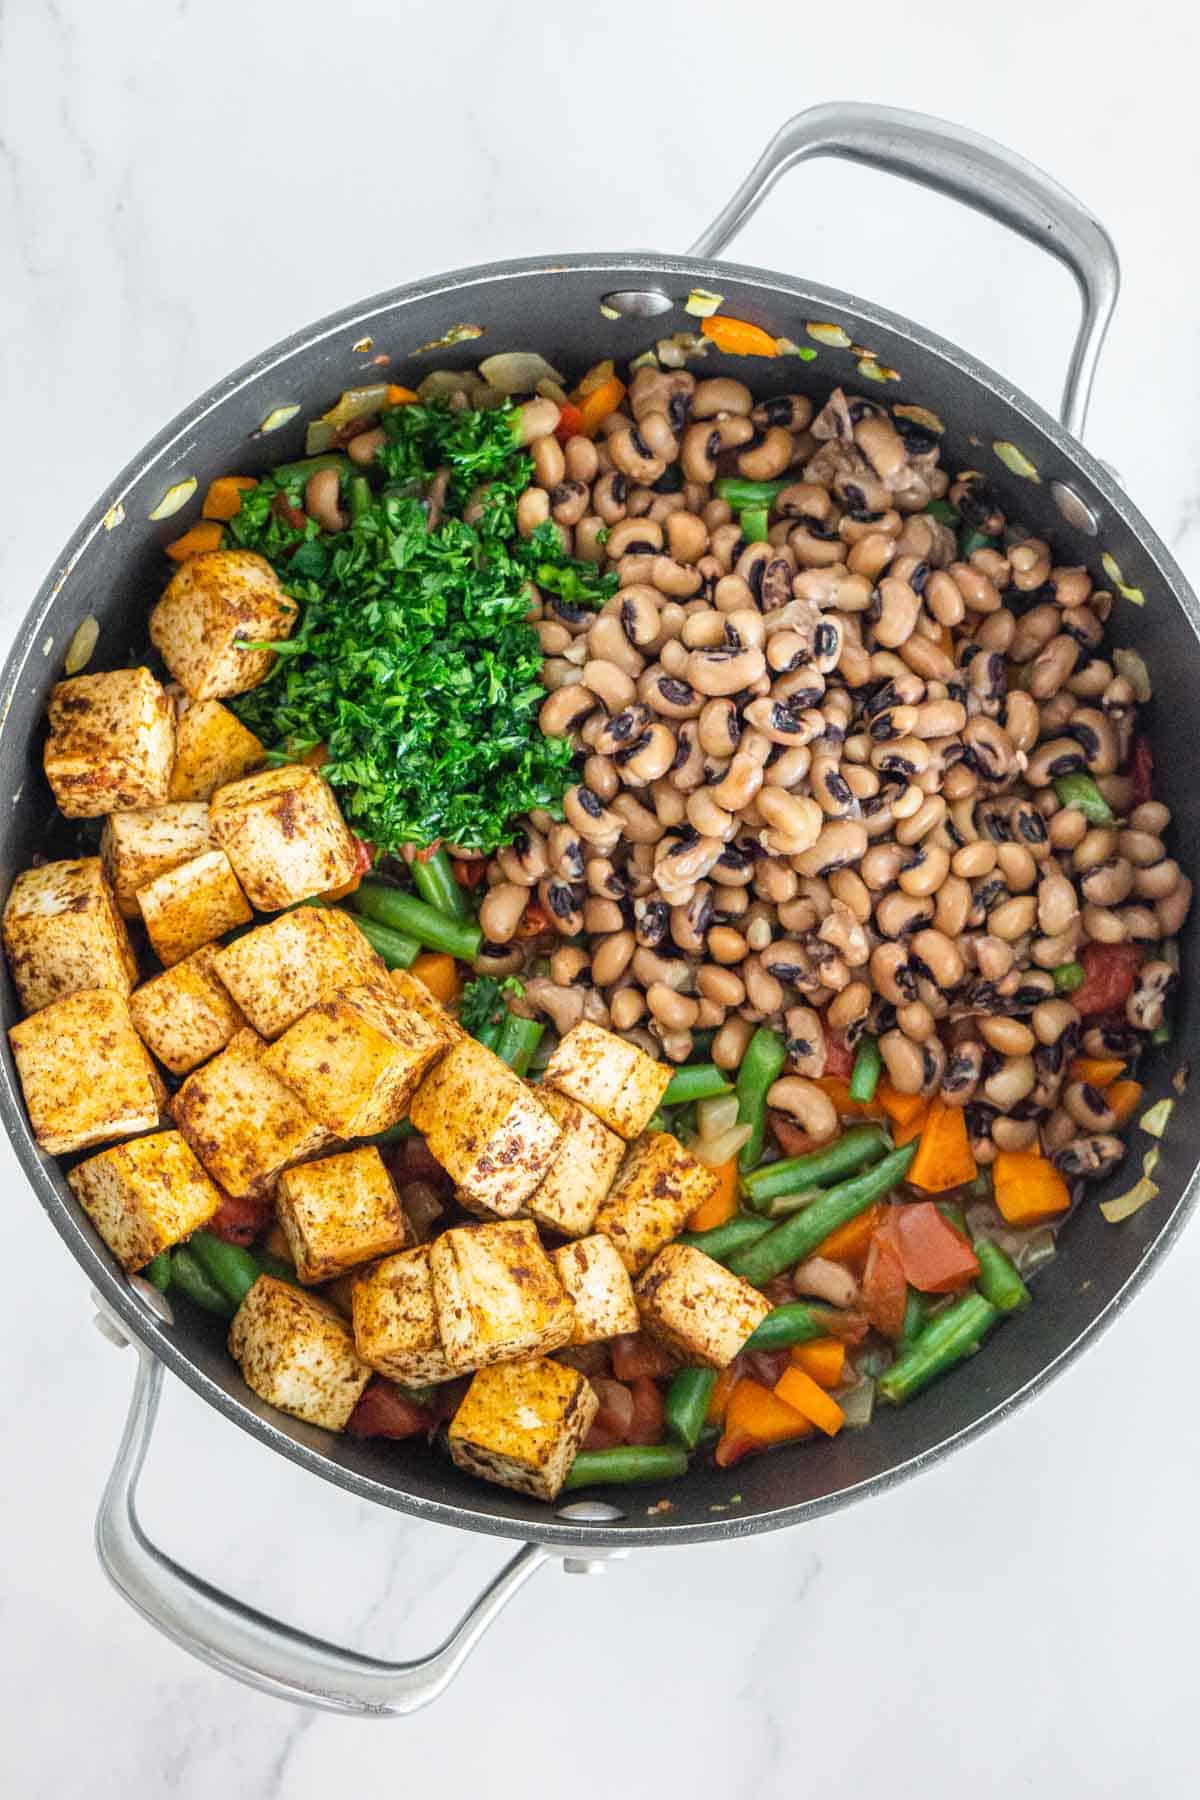 Black eyed peas, blackened tofu, and herbs added to a casserole pan with veggies.